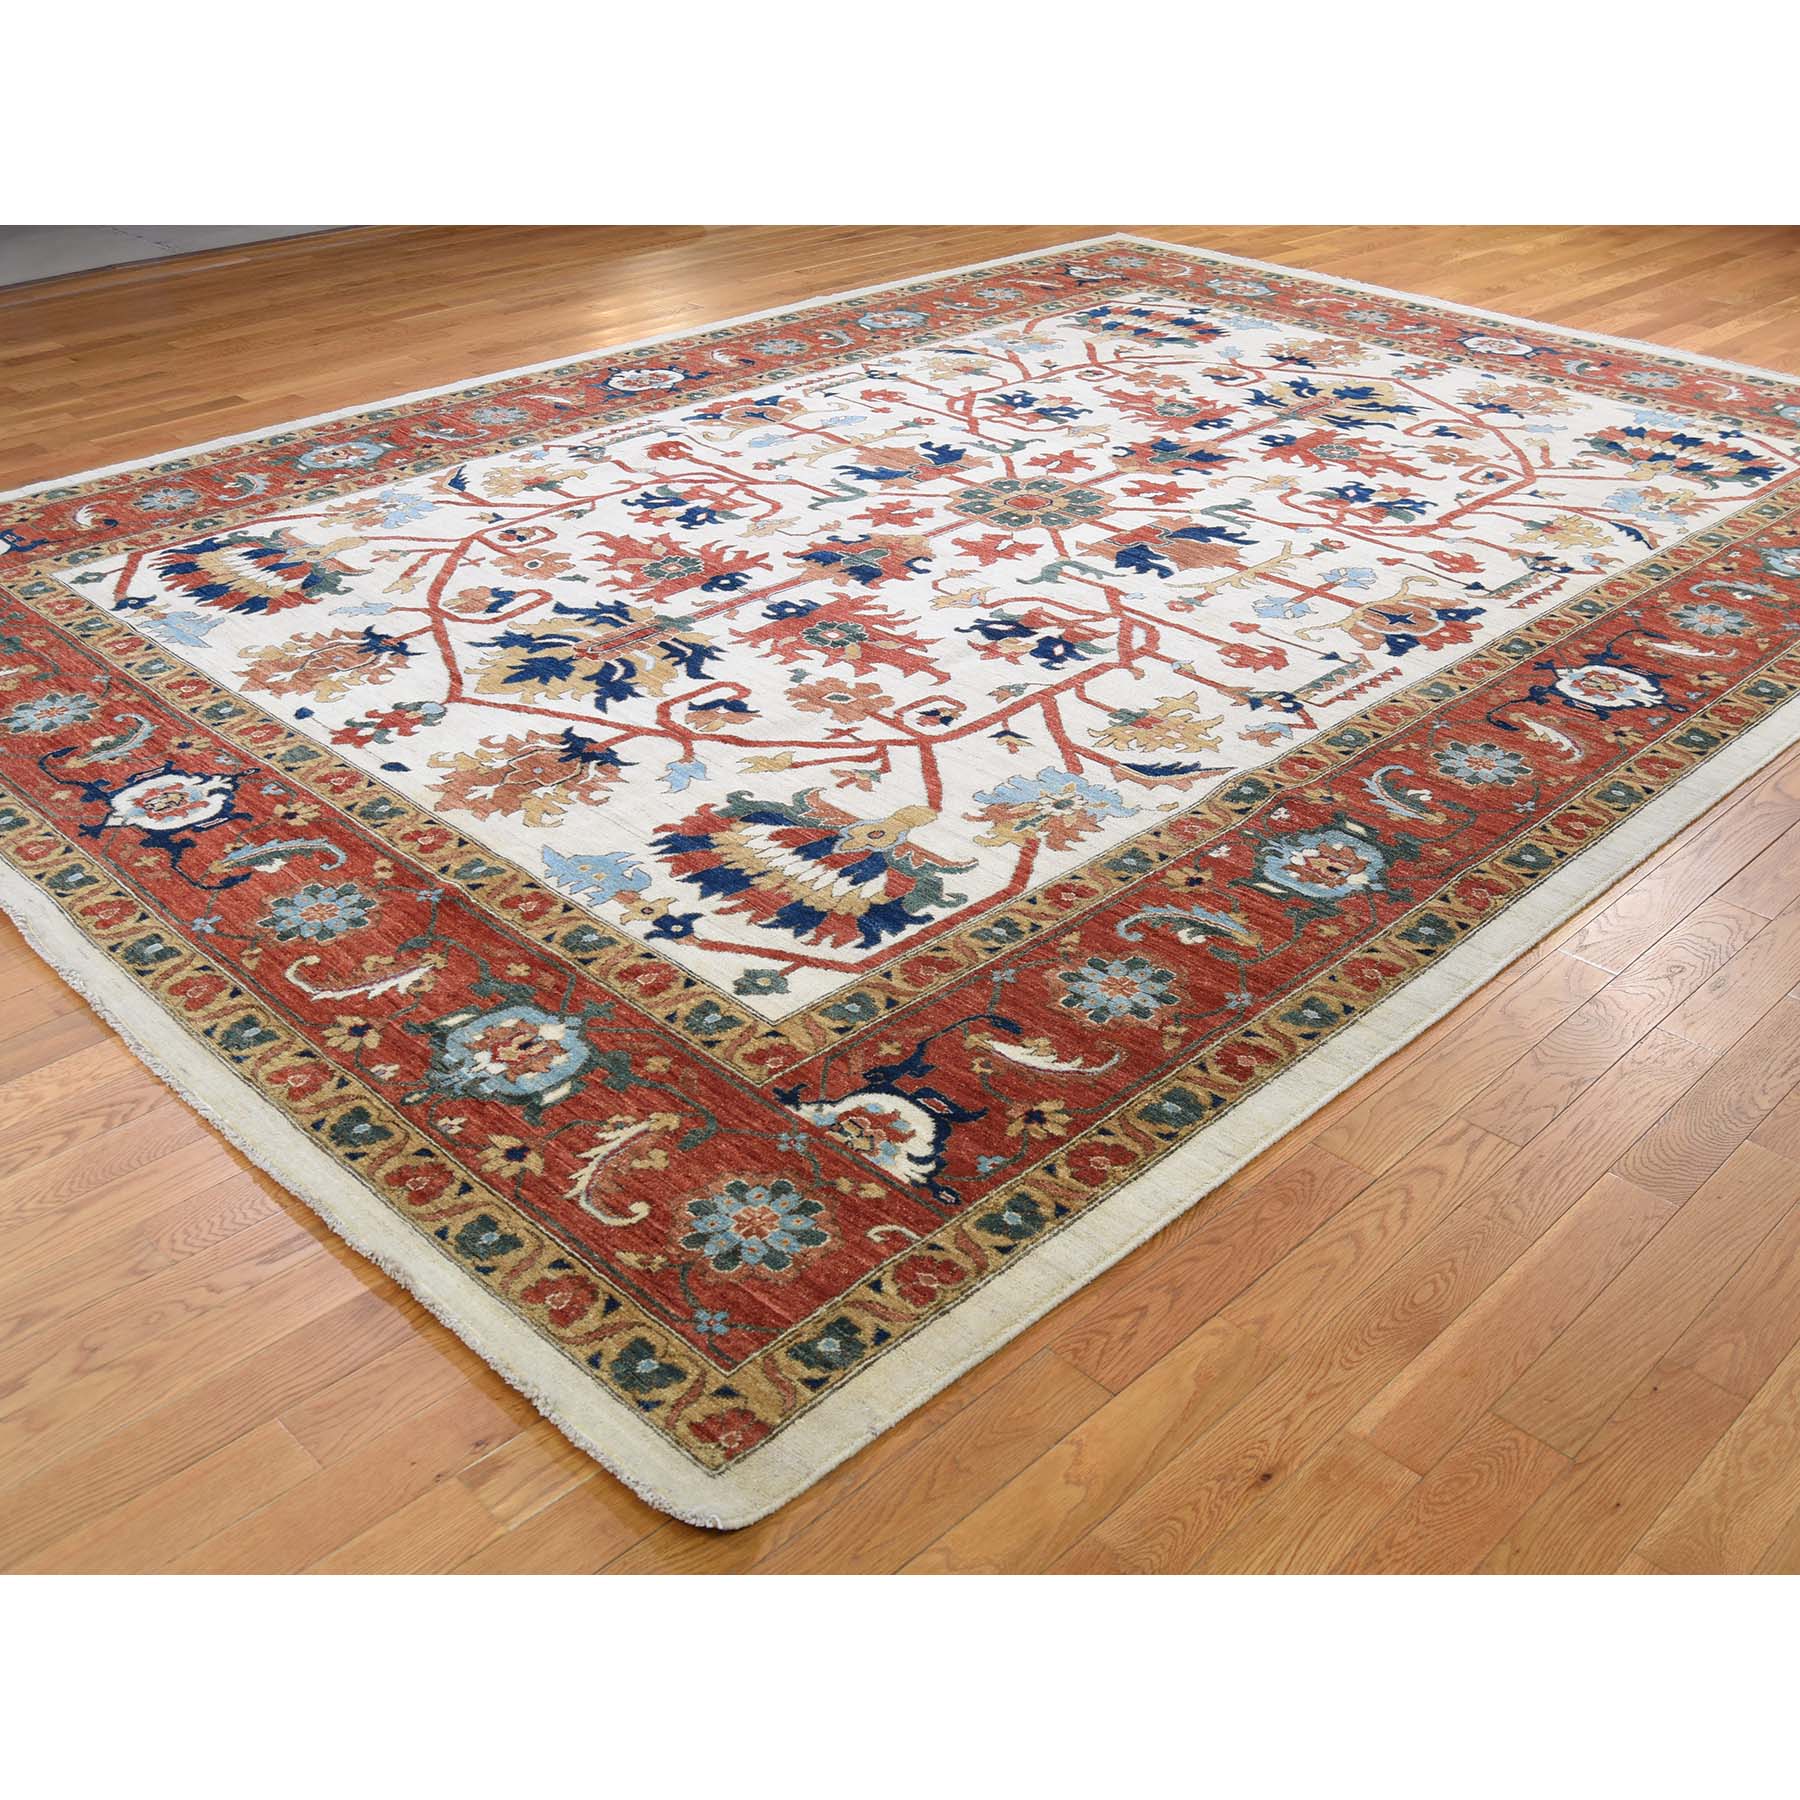 10-2 x13-10  Peshawar Pure Wool All-over Heriz Design Hand-Knotted Oriental Rug 